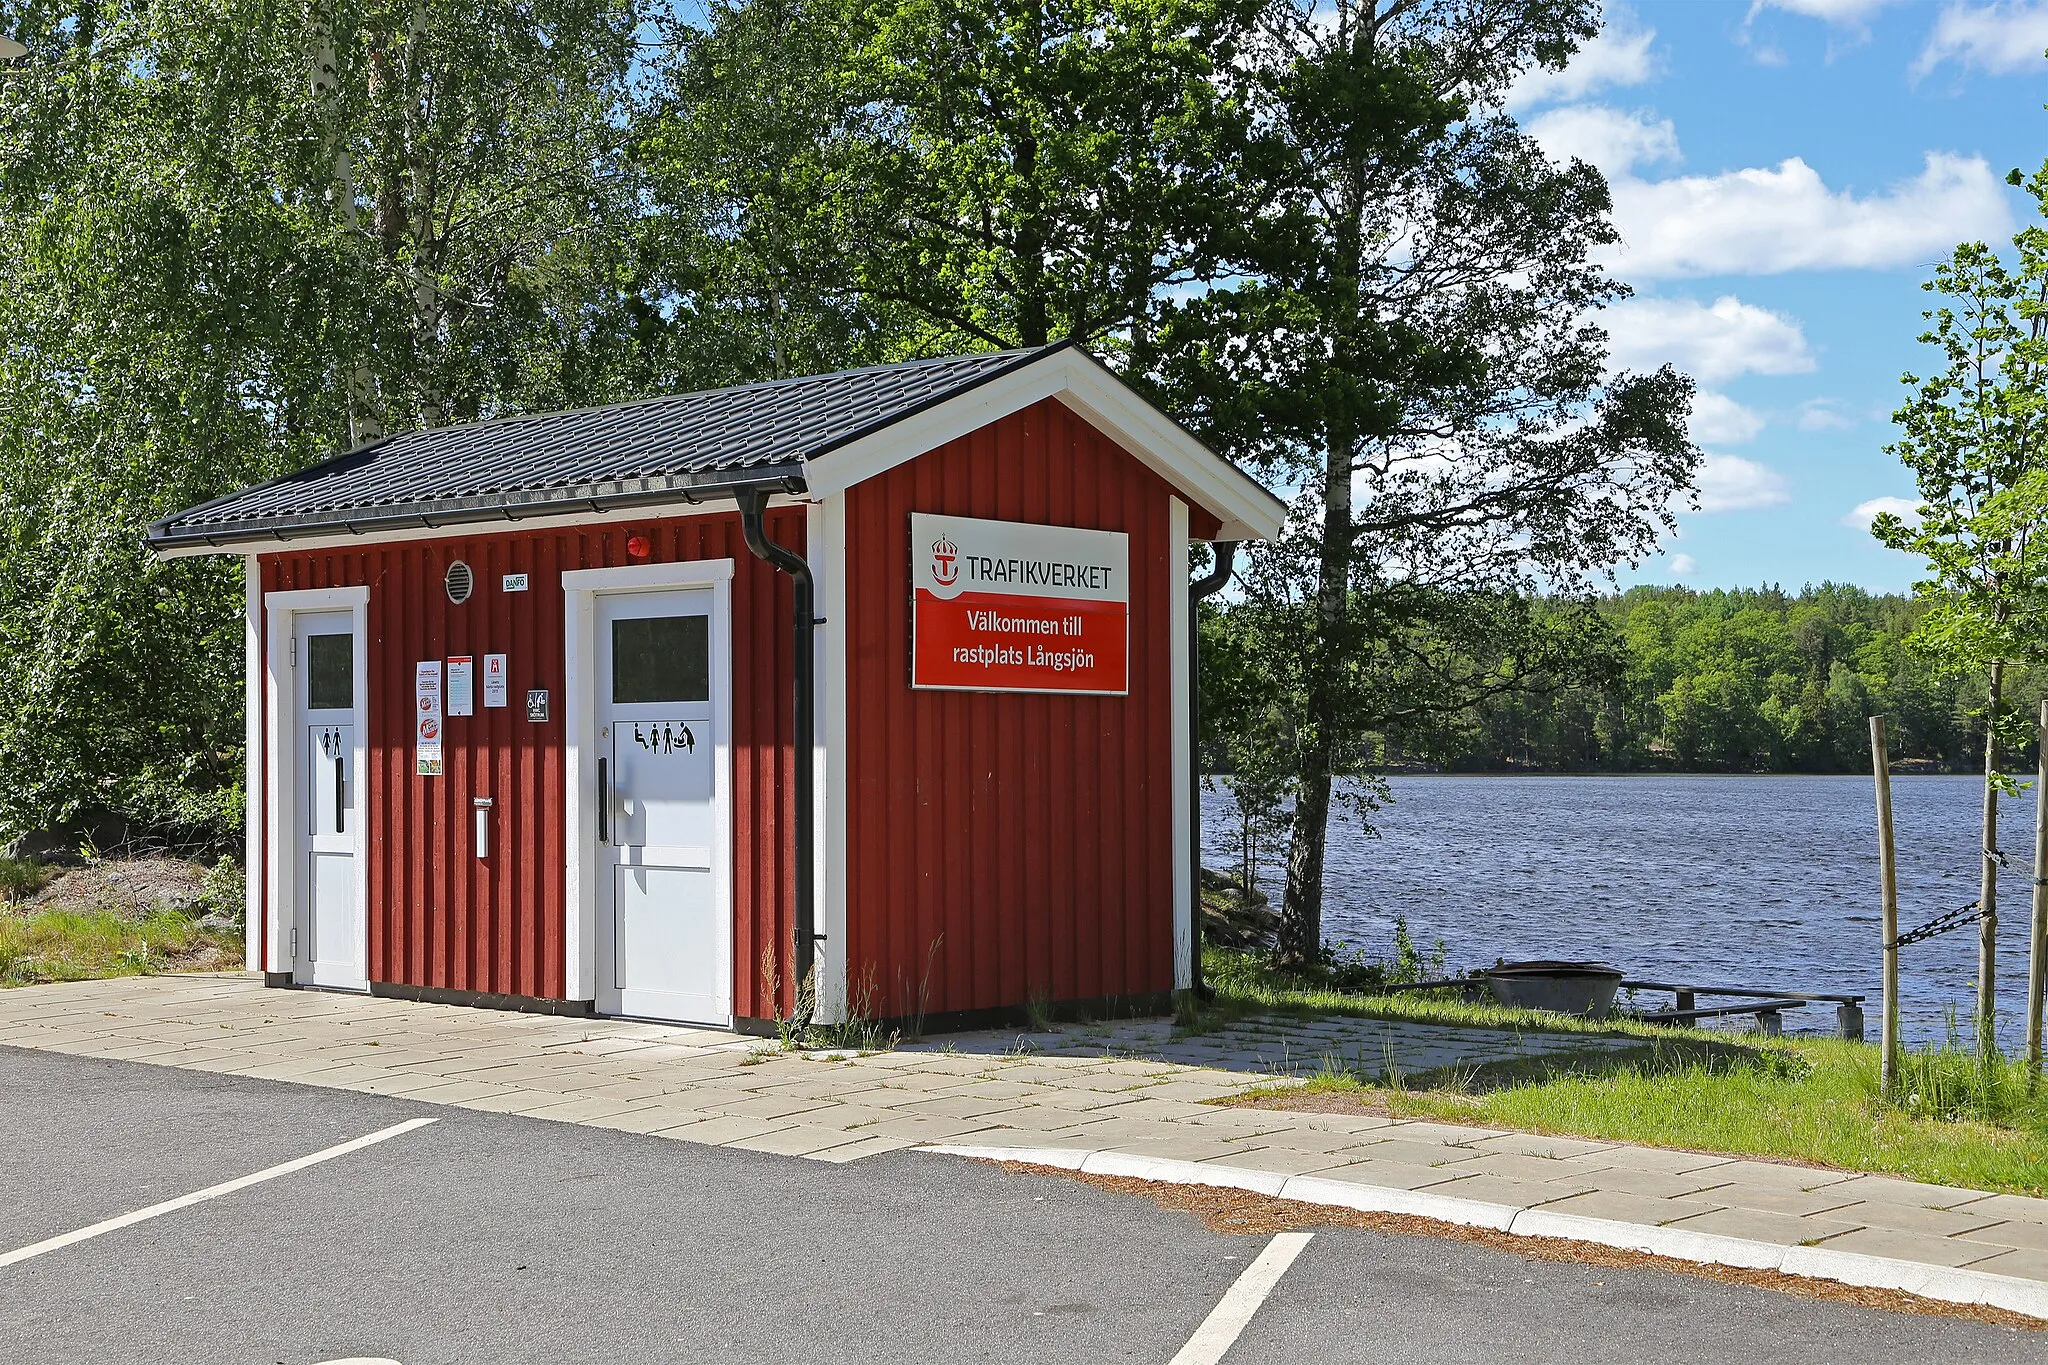 Photo showing: Ankarsrum is a town in the municipality Västervik in the Swedish province of Kalmar län.